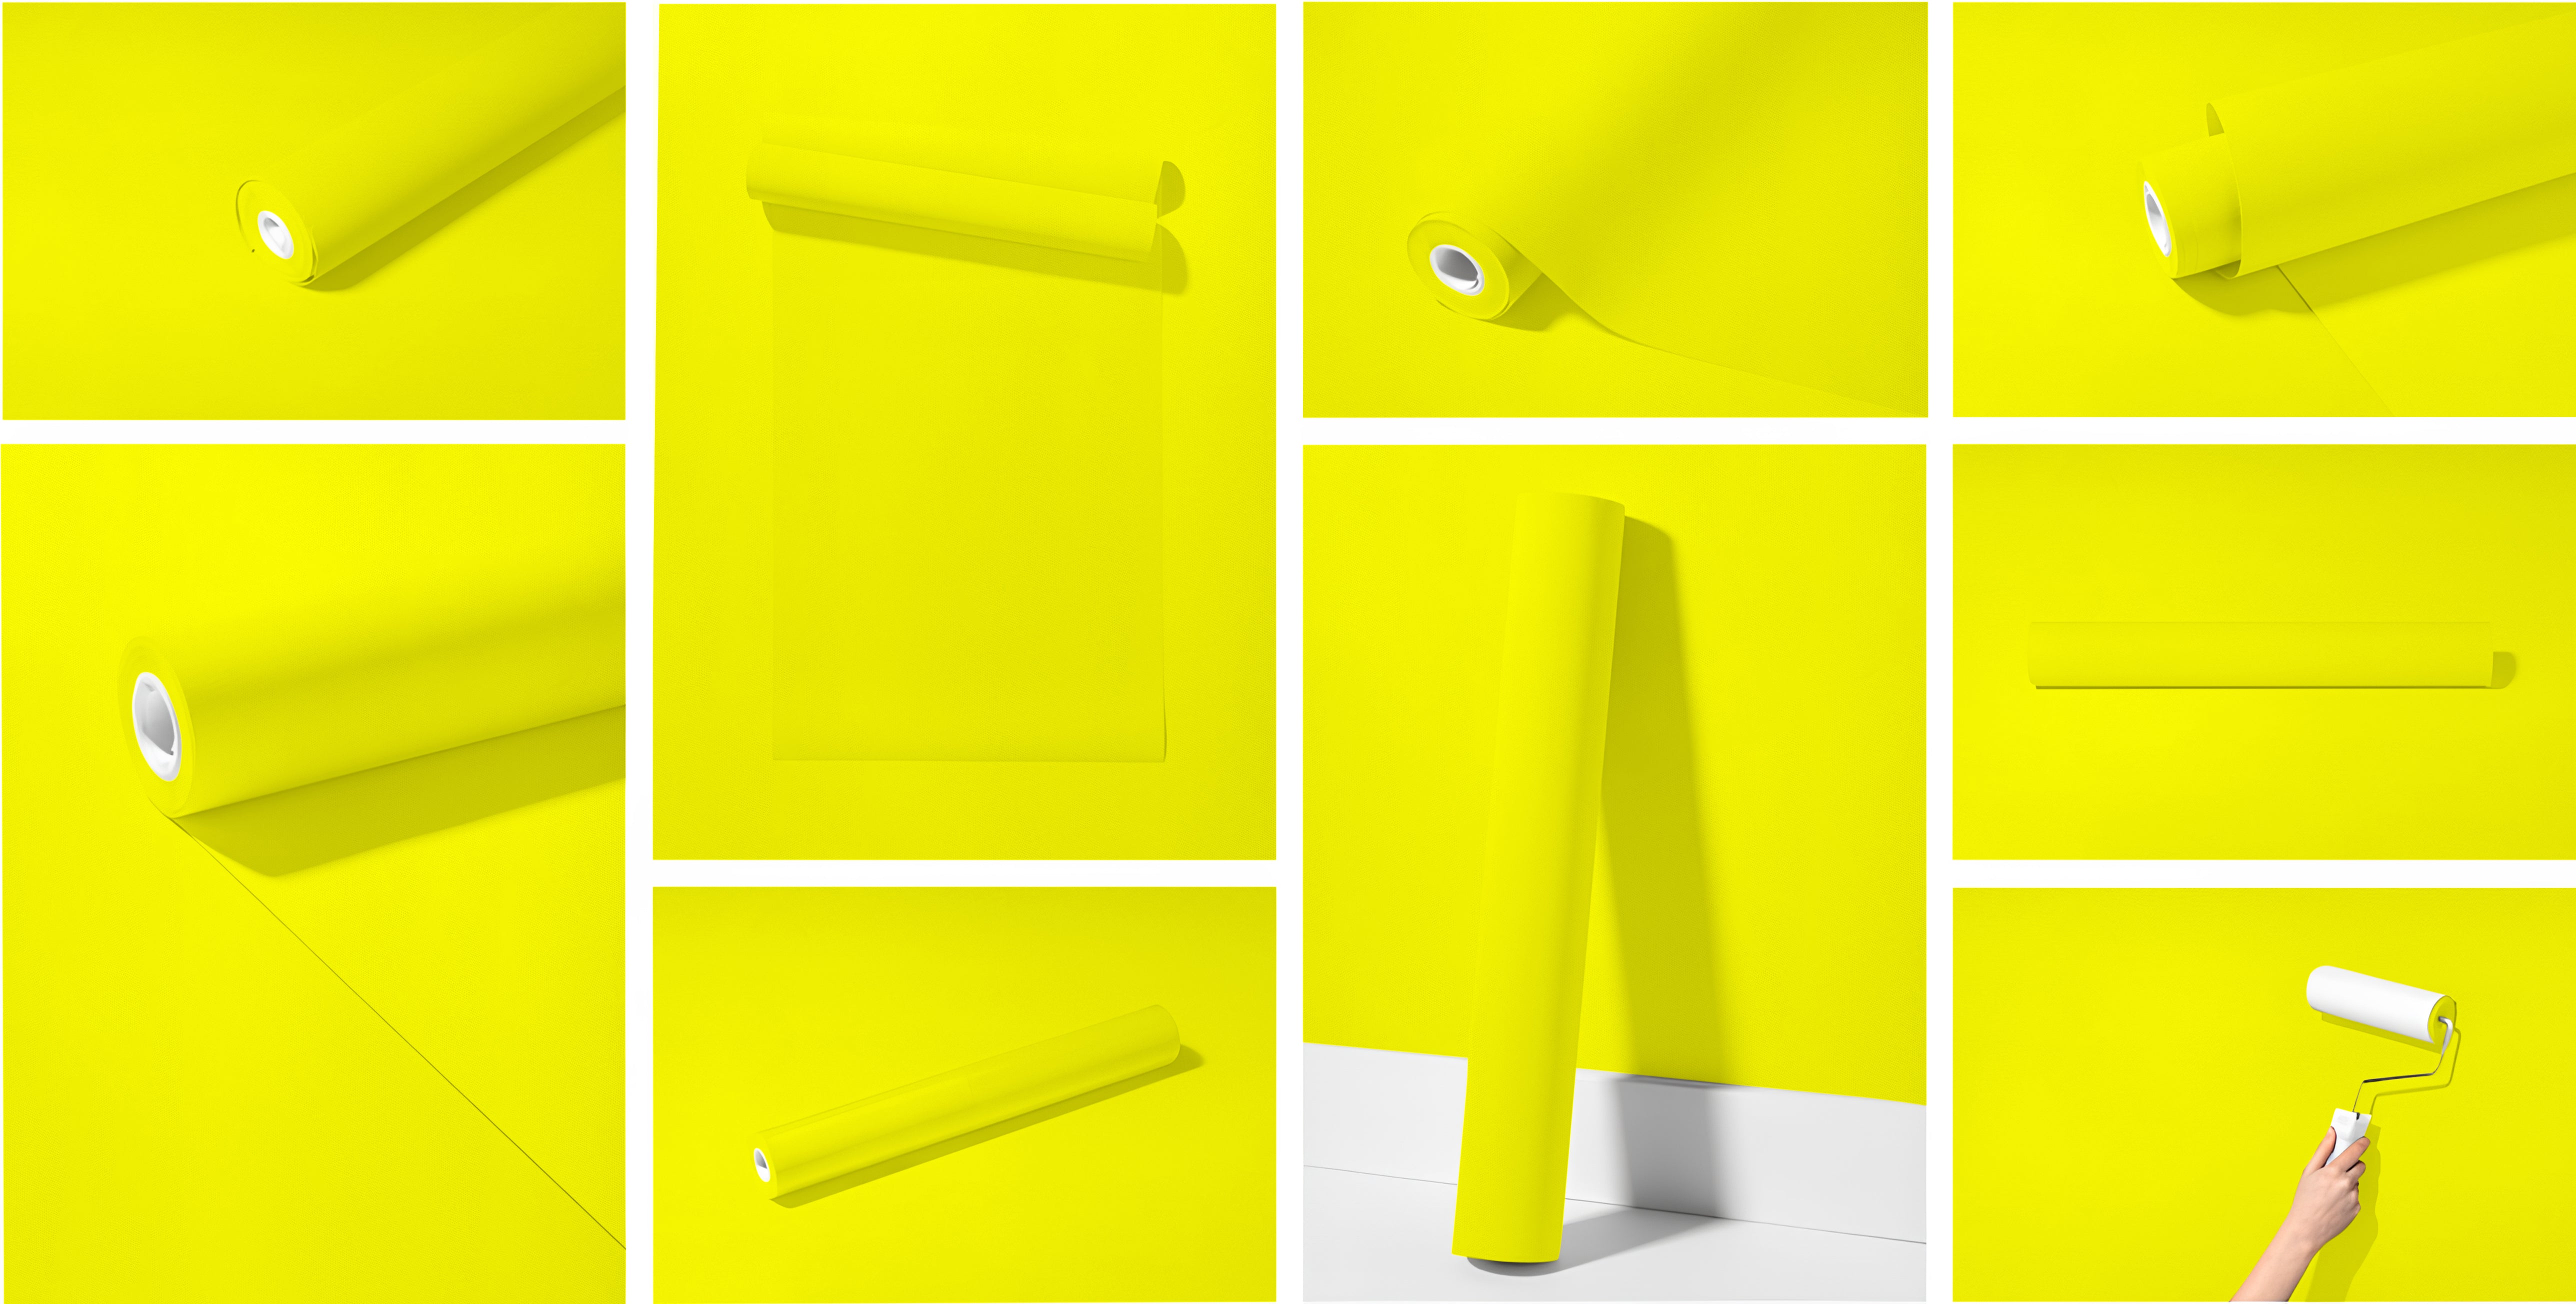 Peel & Stick Removable Re-usable Paint - Color RAL 1026 Luminous Yellow - offRAL™ - RALRAW LLC, USA